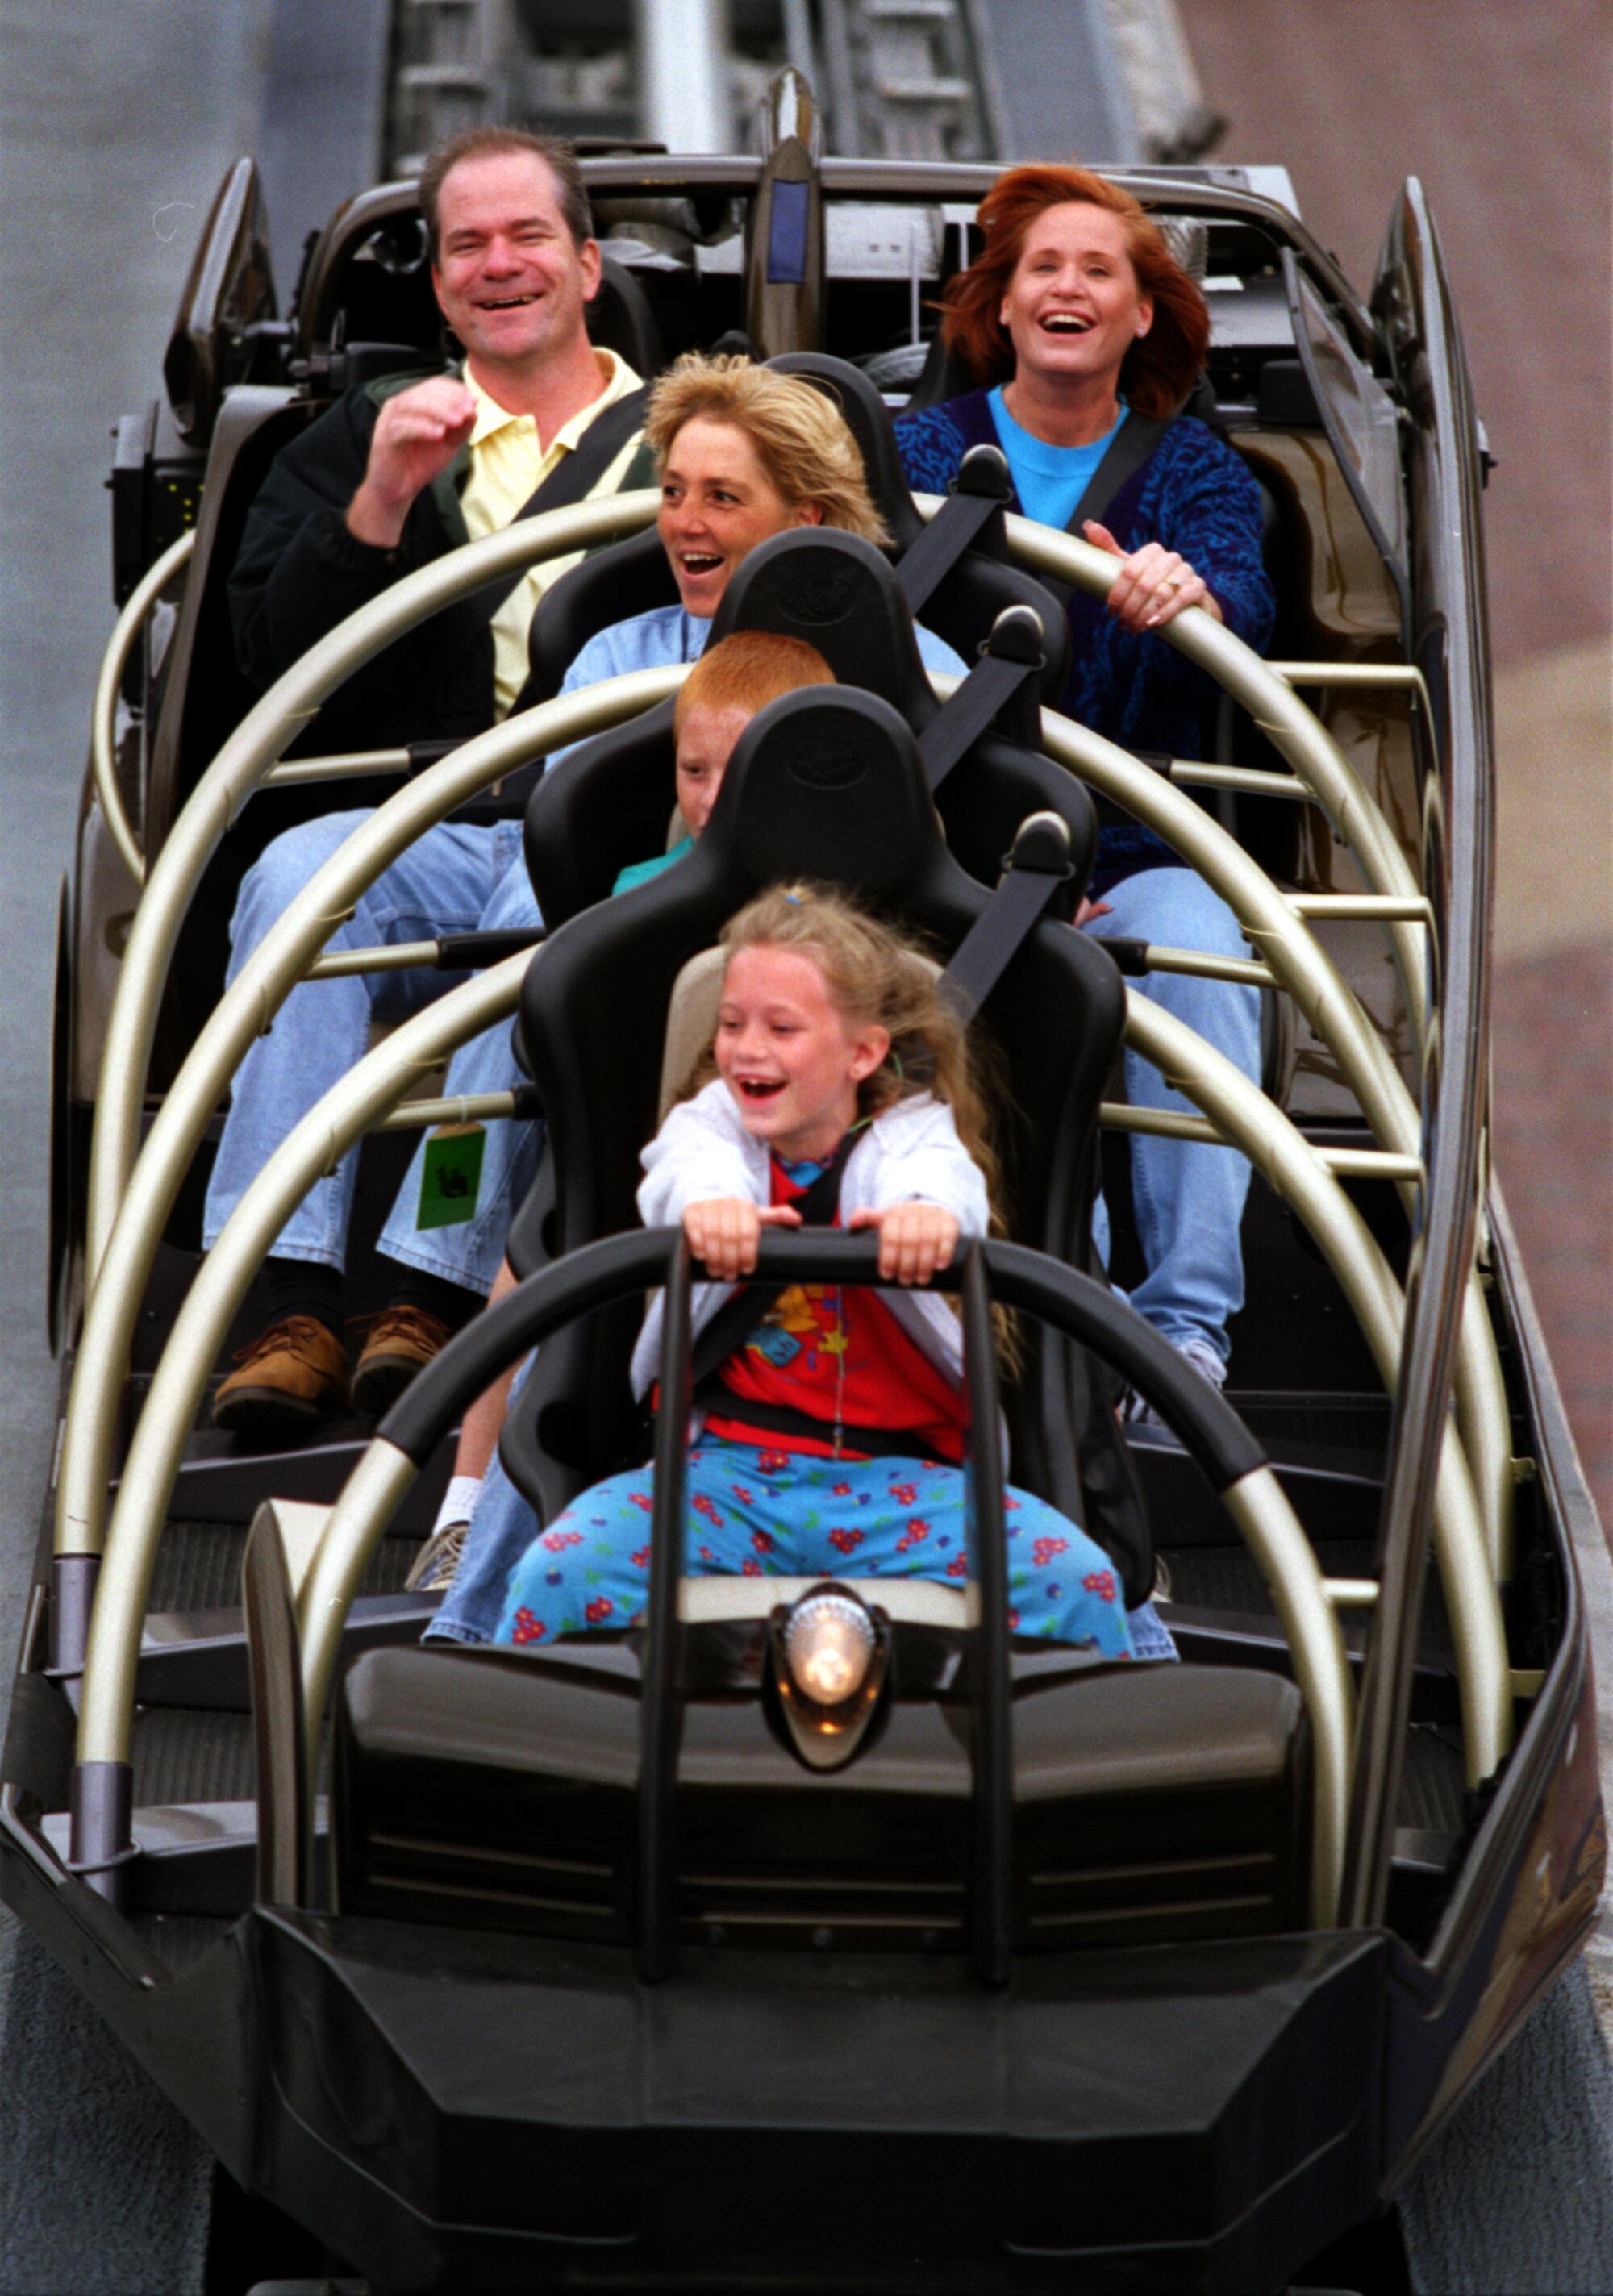 A group of people riding a rocket-themed ride at Disneyland.